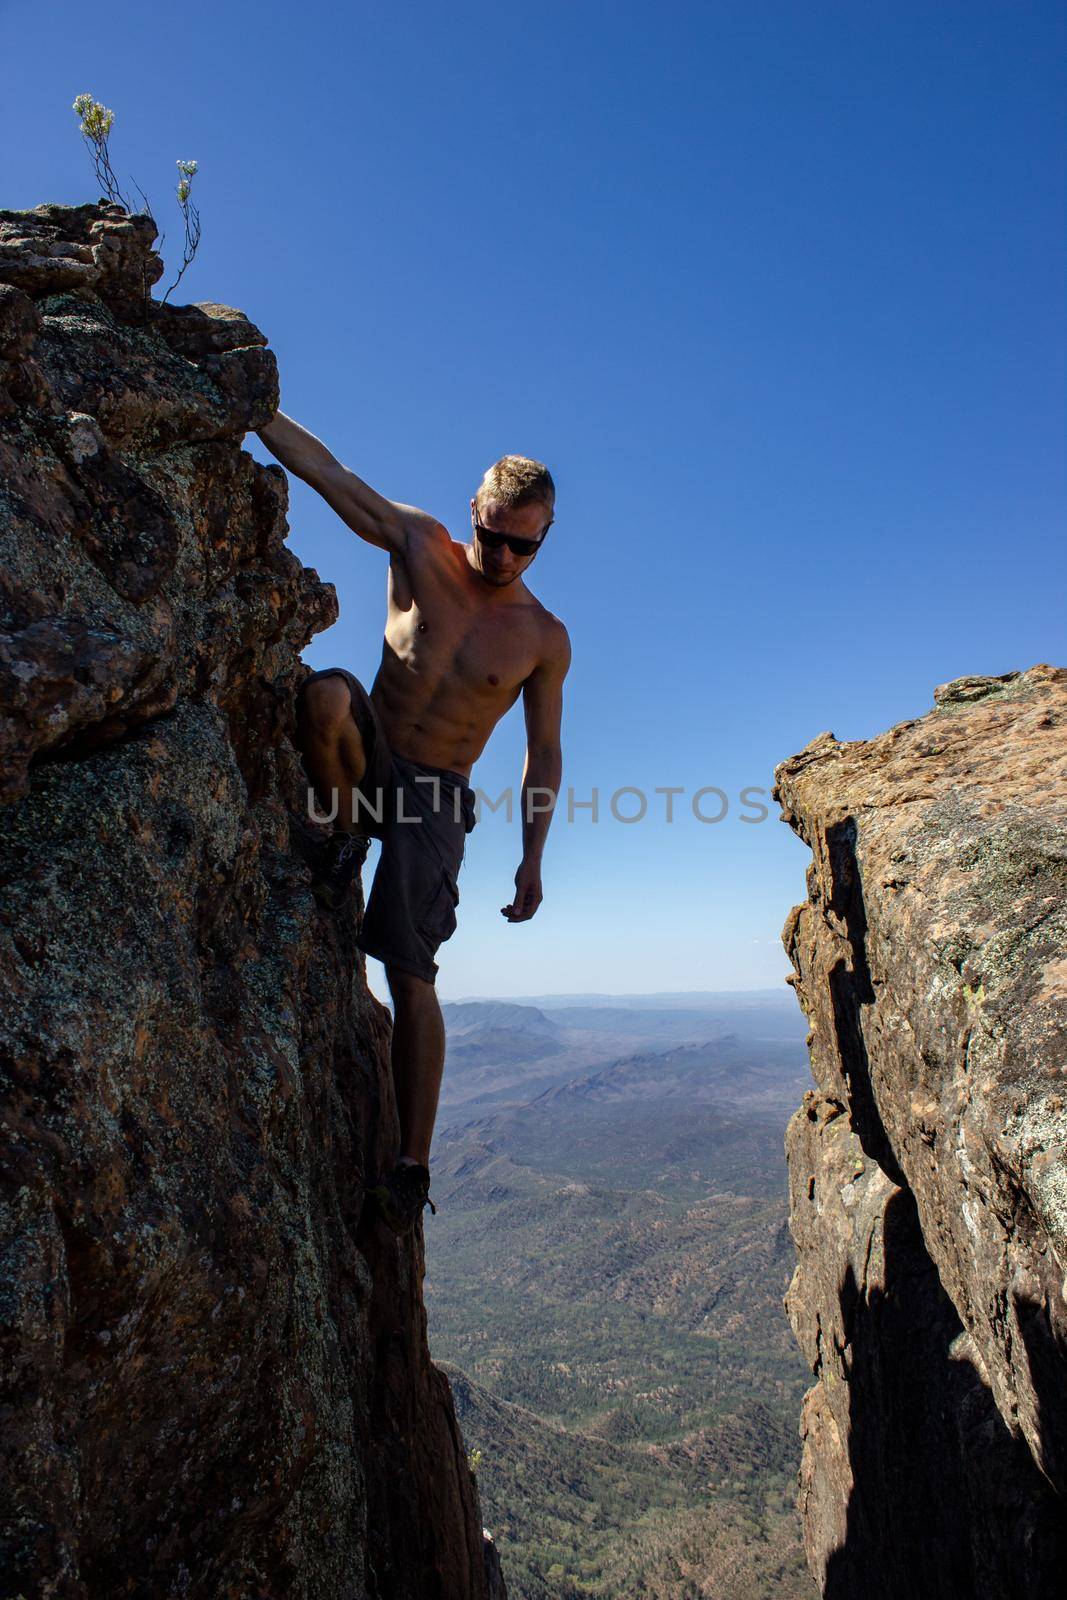 jung man hanging between 2 rocks on St Mary's Peak from the Flinders Ranges National Park by bettercallcurry